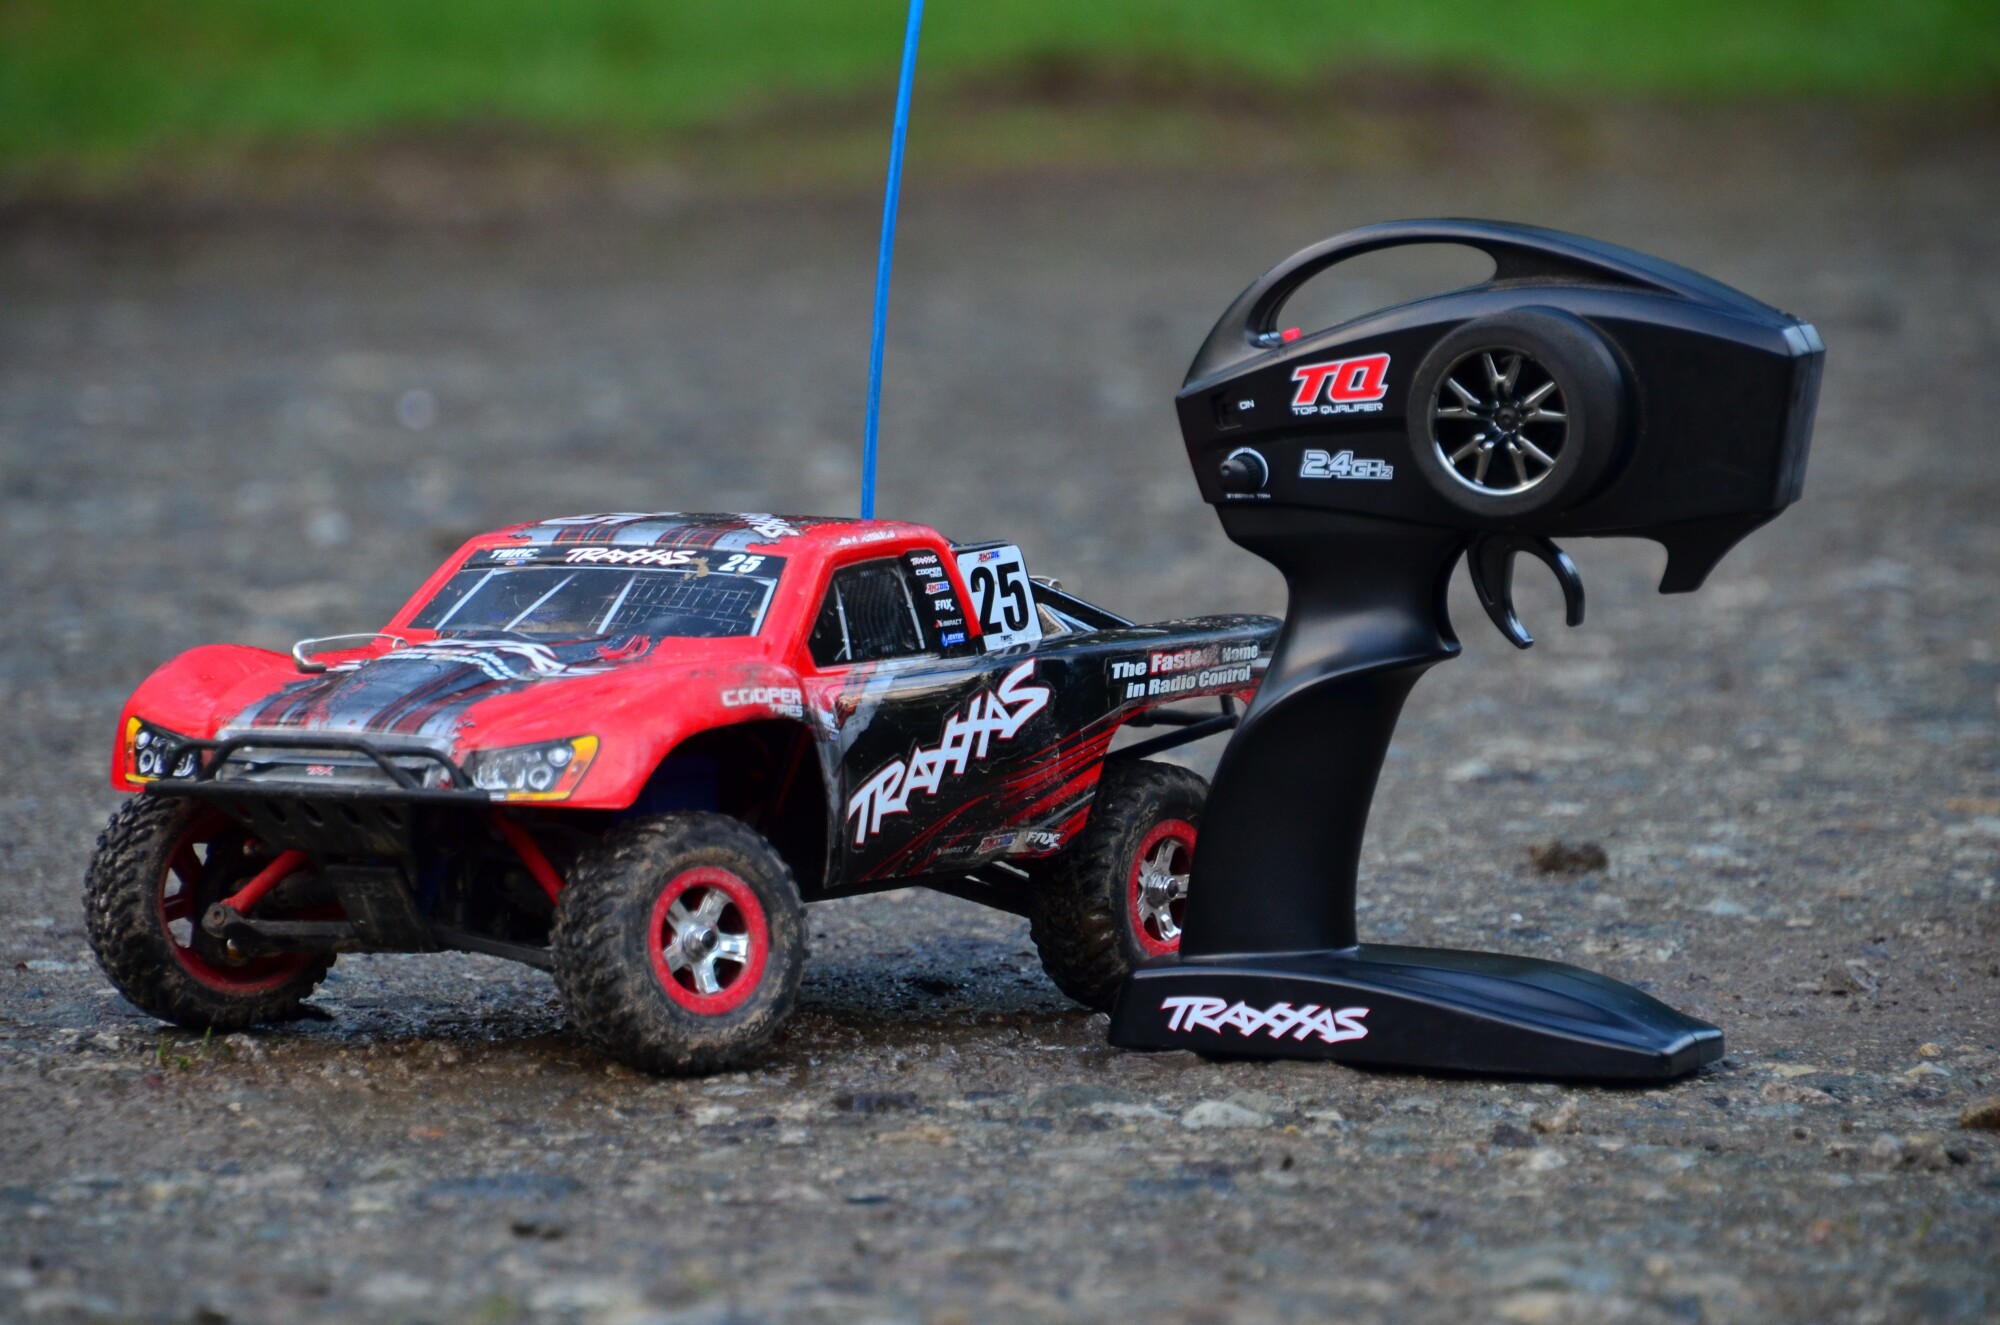 Best RC Drift Cars (Review & Buying Guide) in 2023